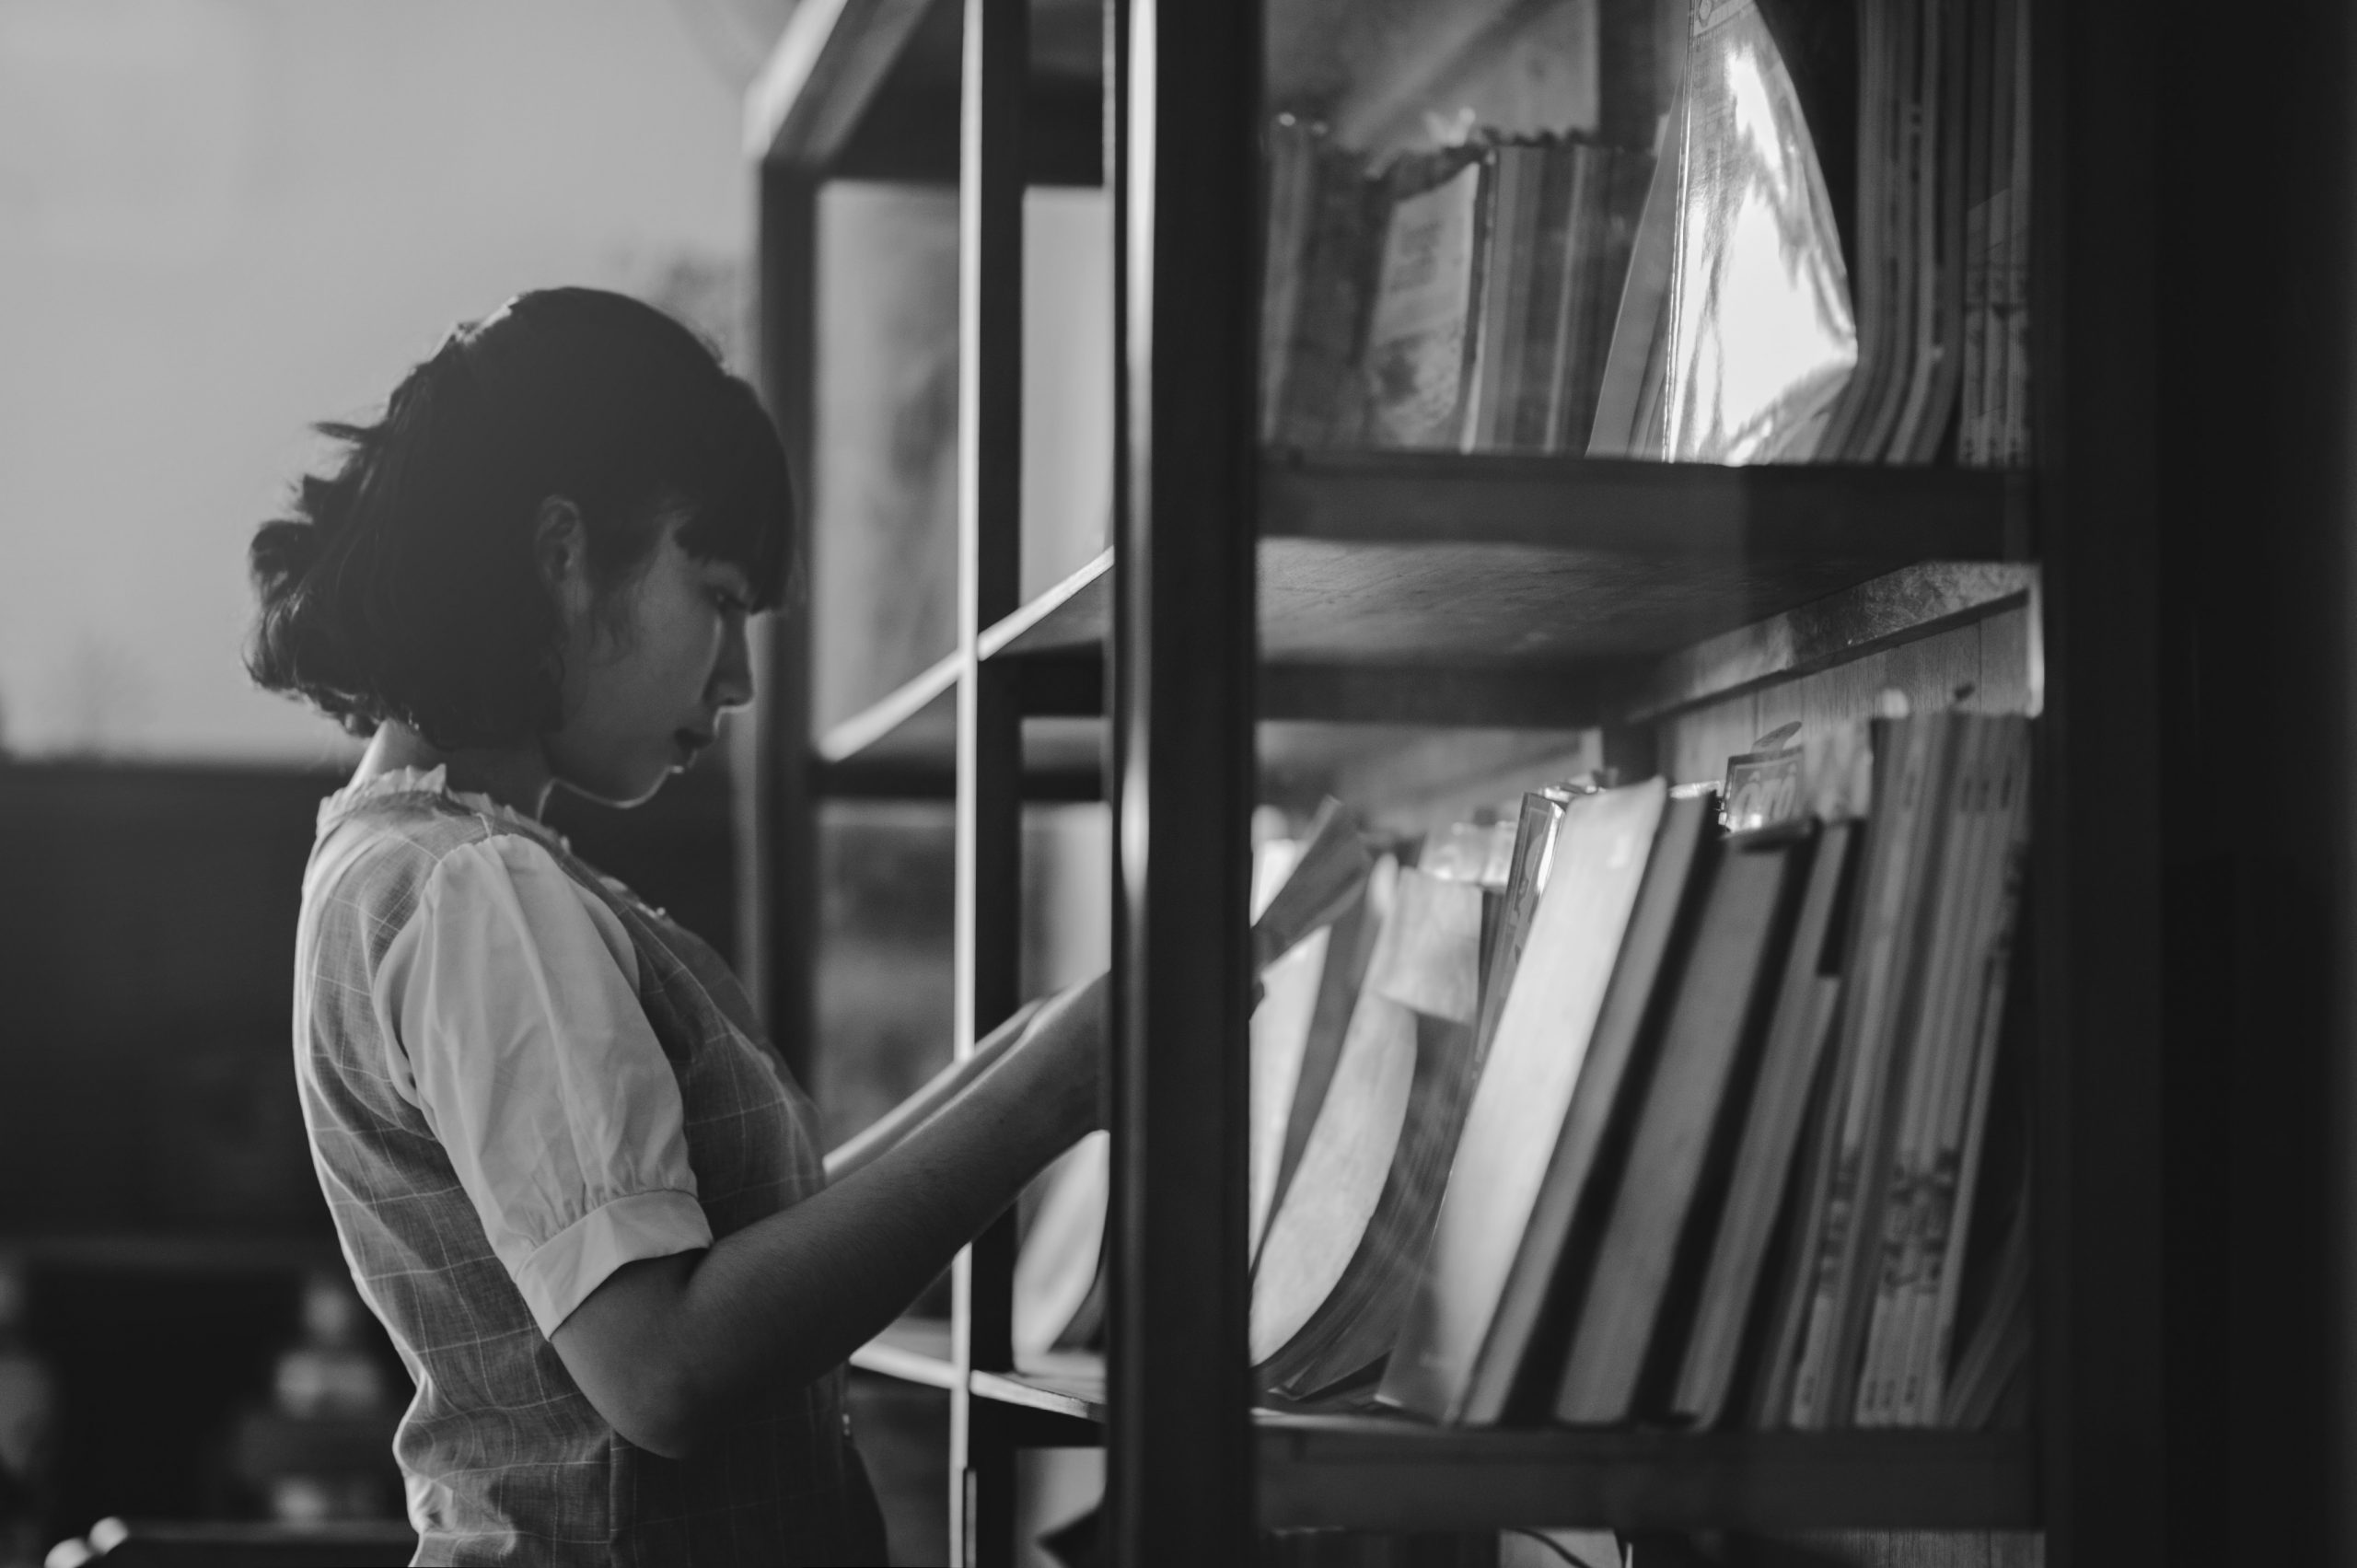 A young girl reading a book in a library